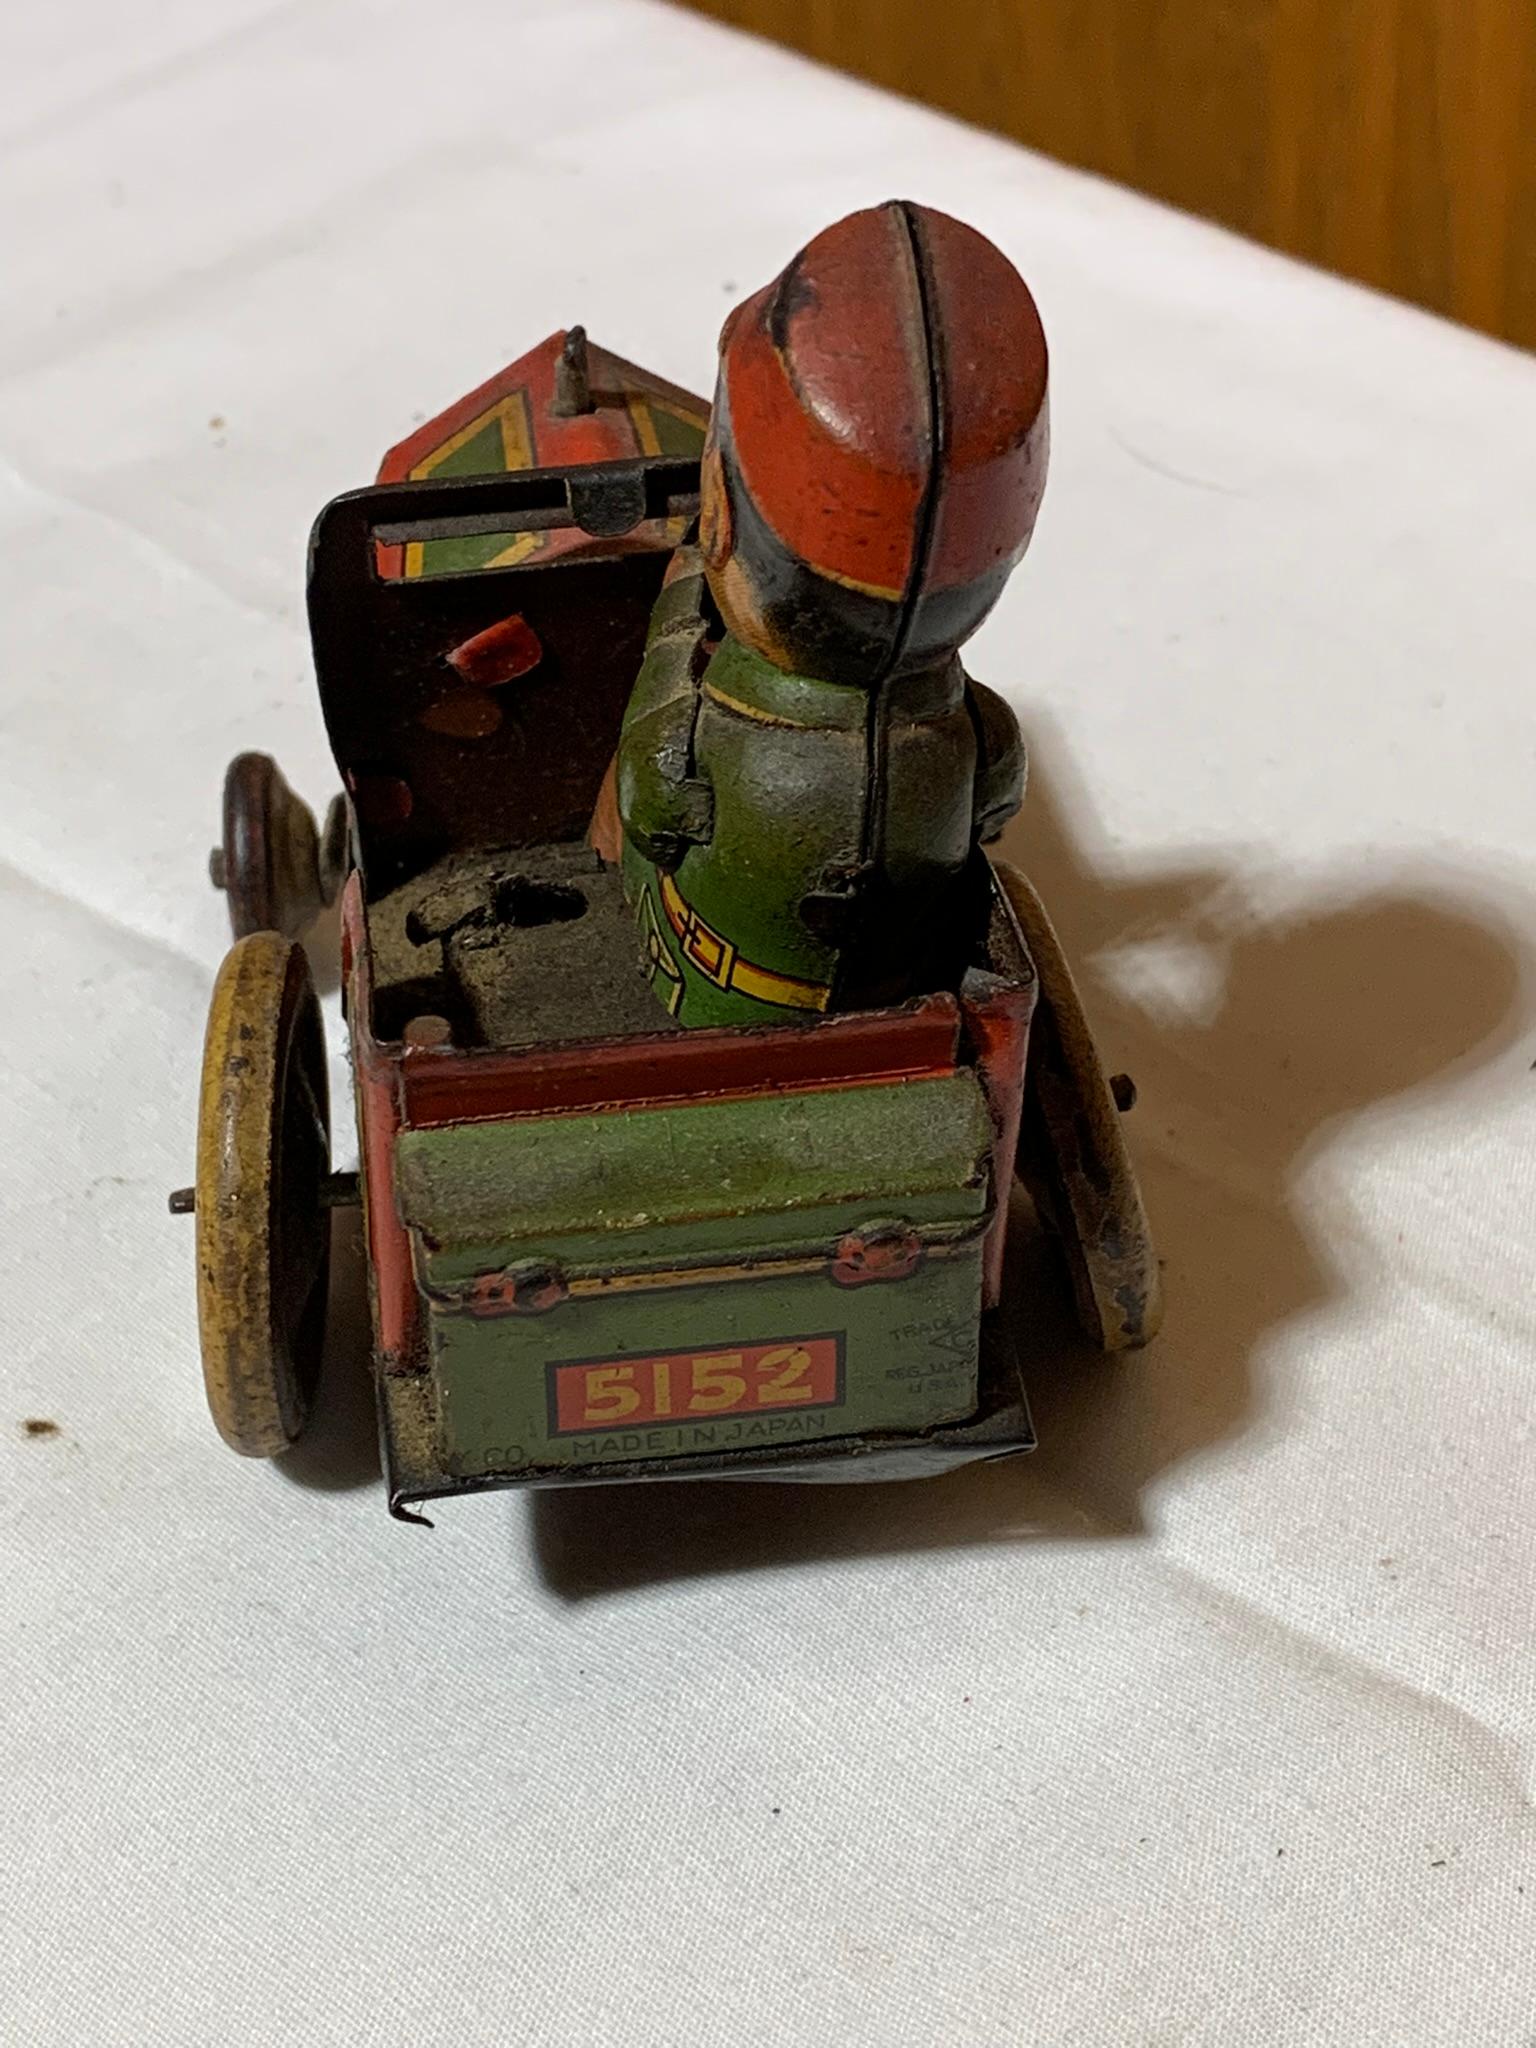 Vintage Windup Tin Toy - not in working order